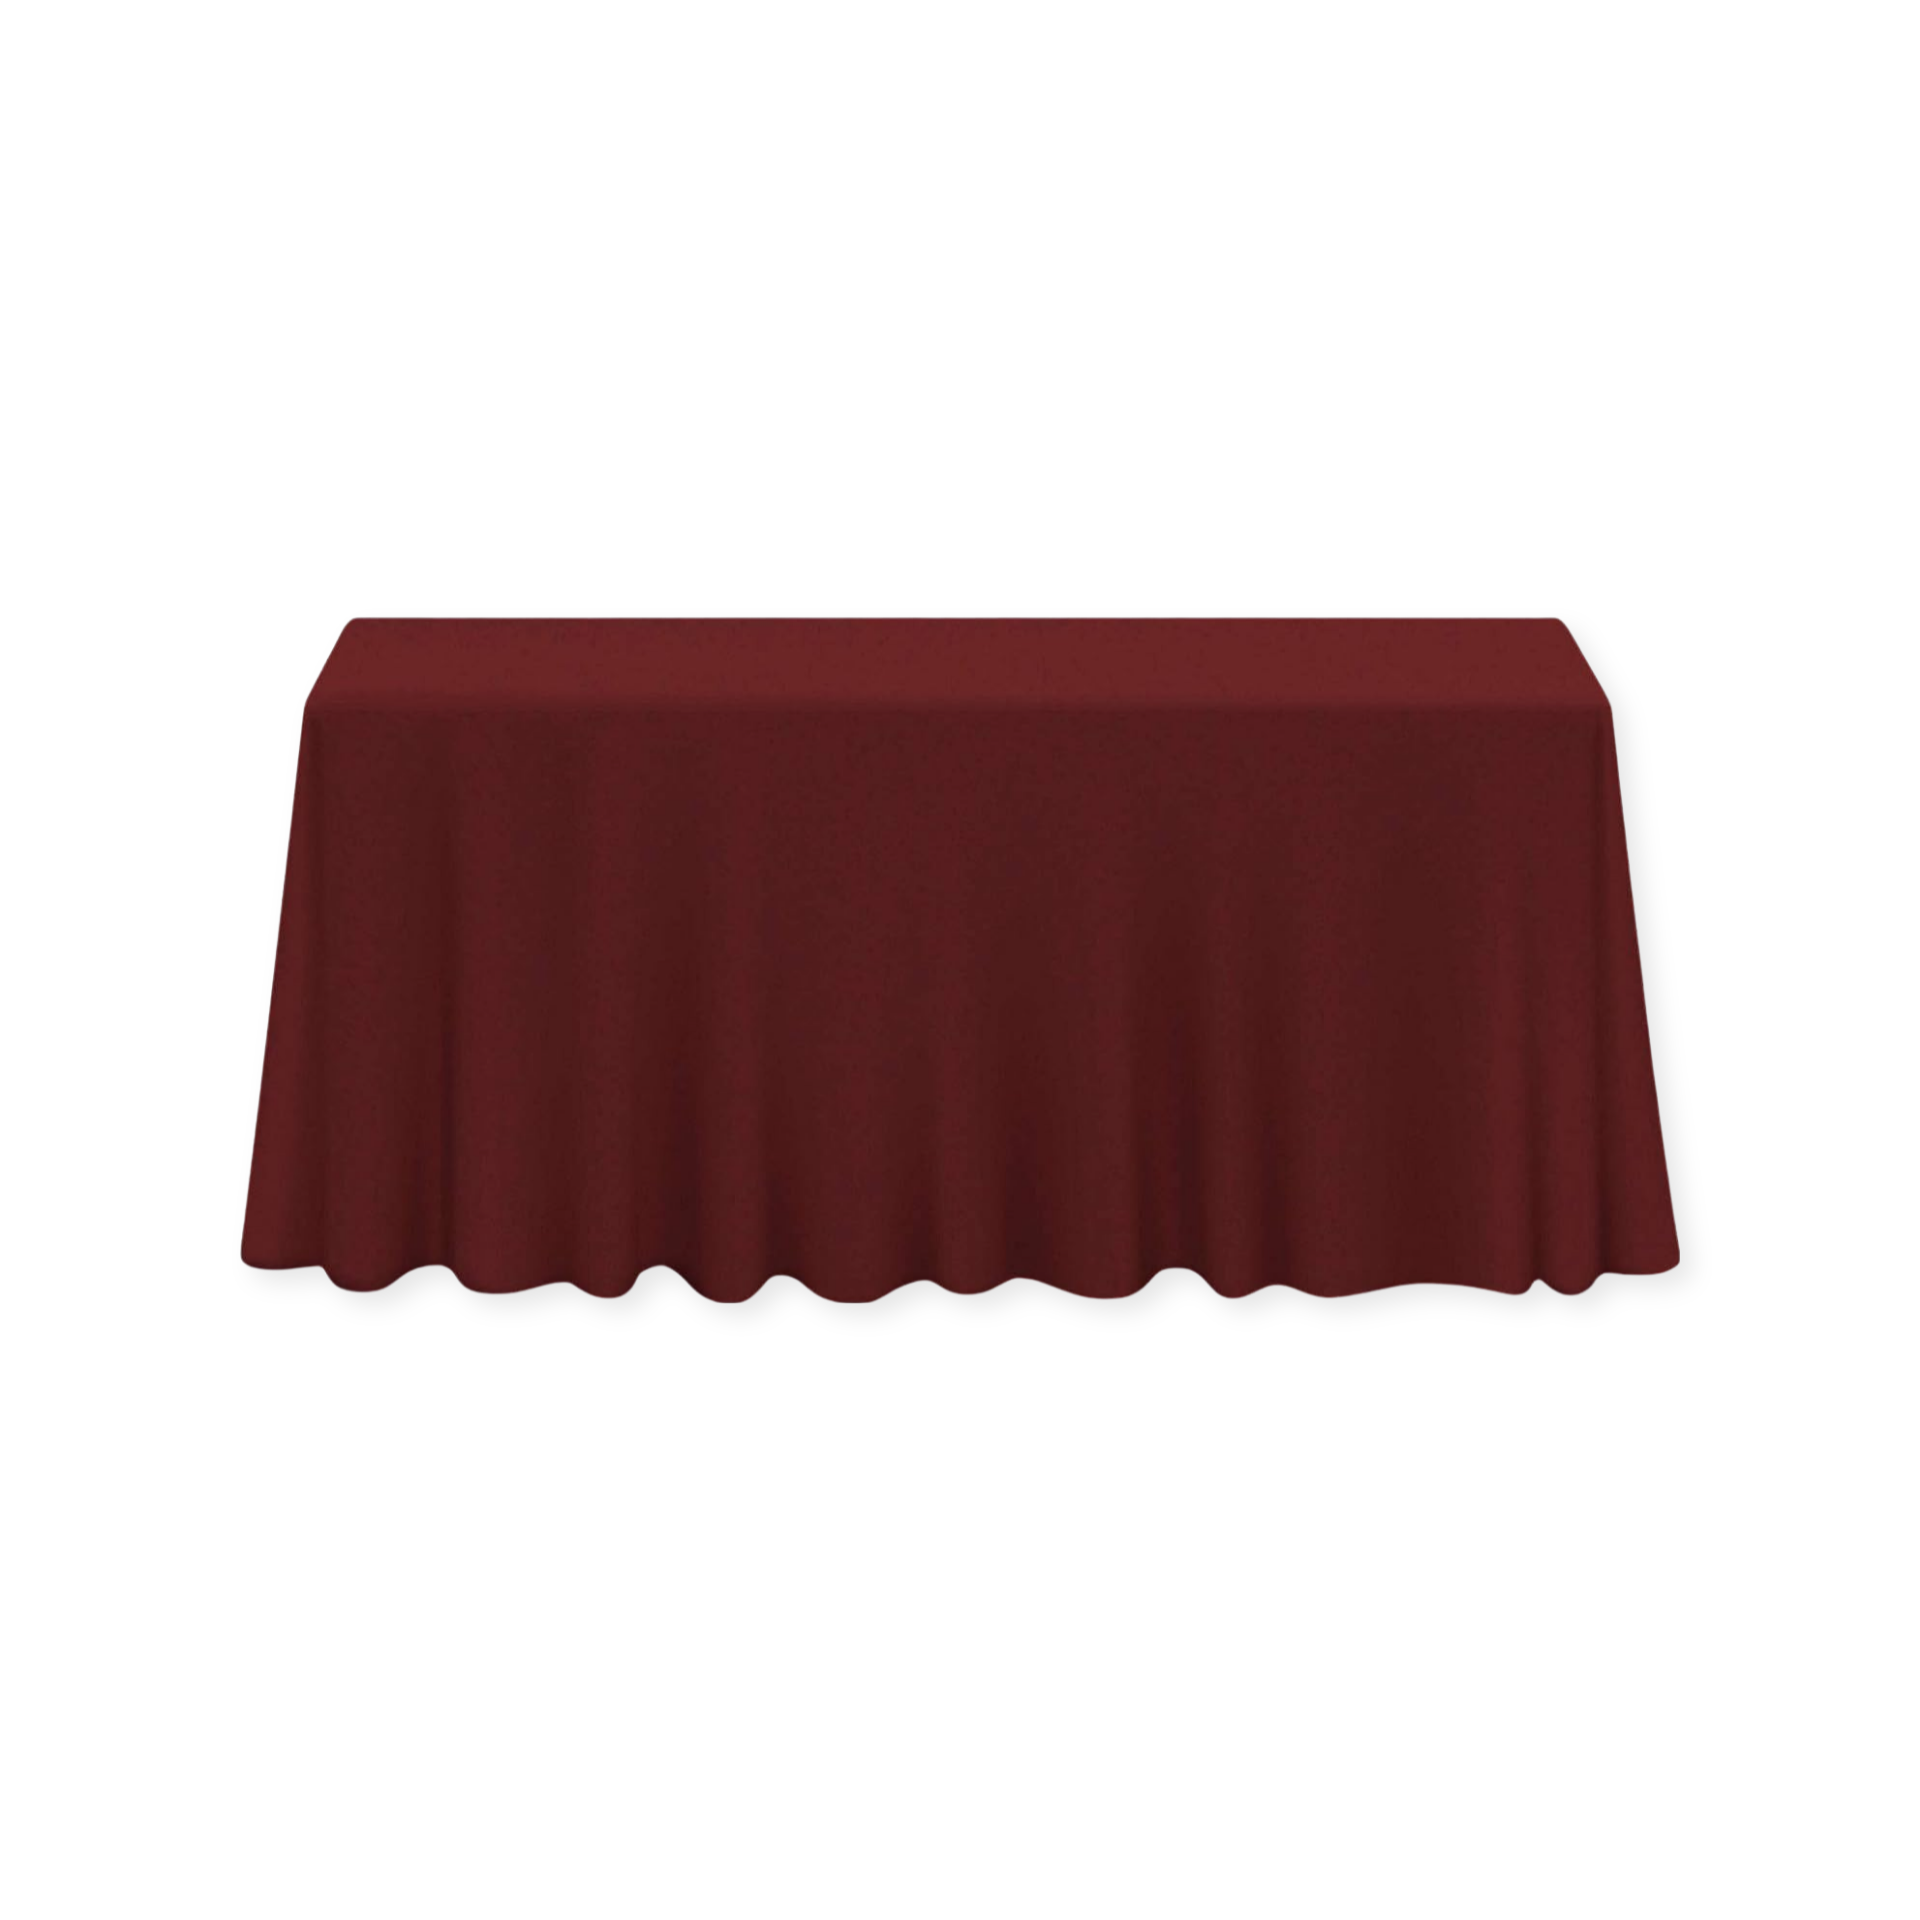 Tablecloth polyester rectangle burgundy  commercial grade wedding party event rental panama city beach